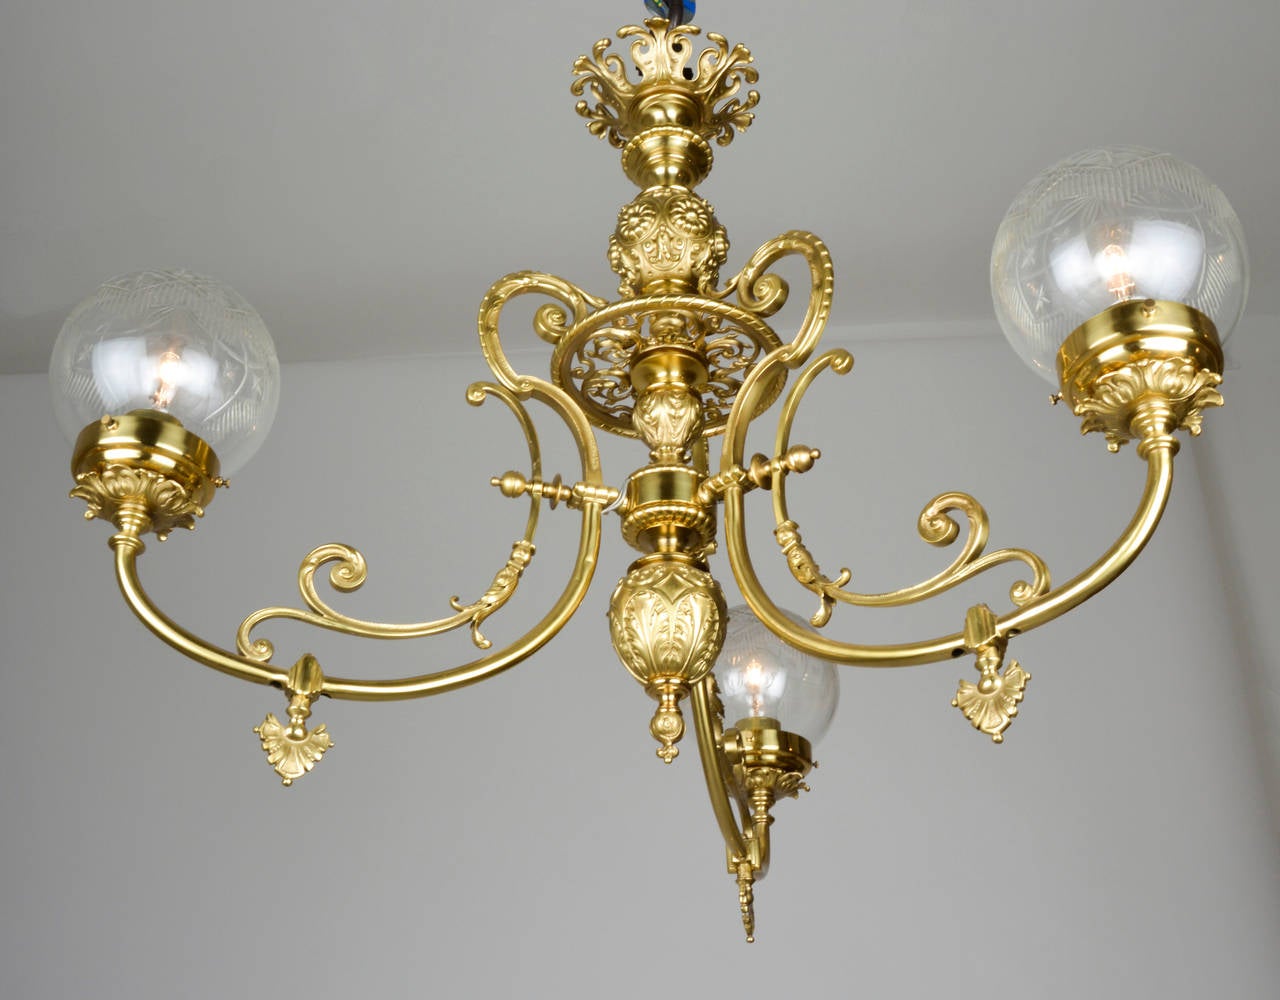 Neoclassical Revival Late 19th Century Neoclassical Brass Gaslight Chandelier For Sale